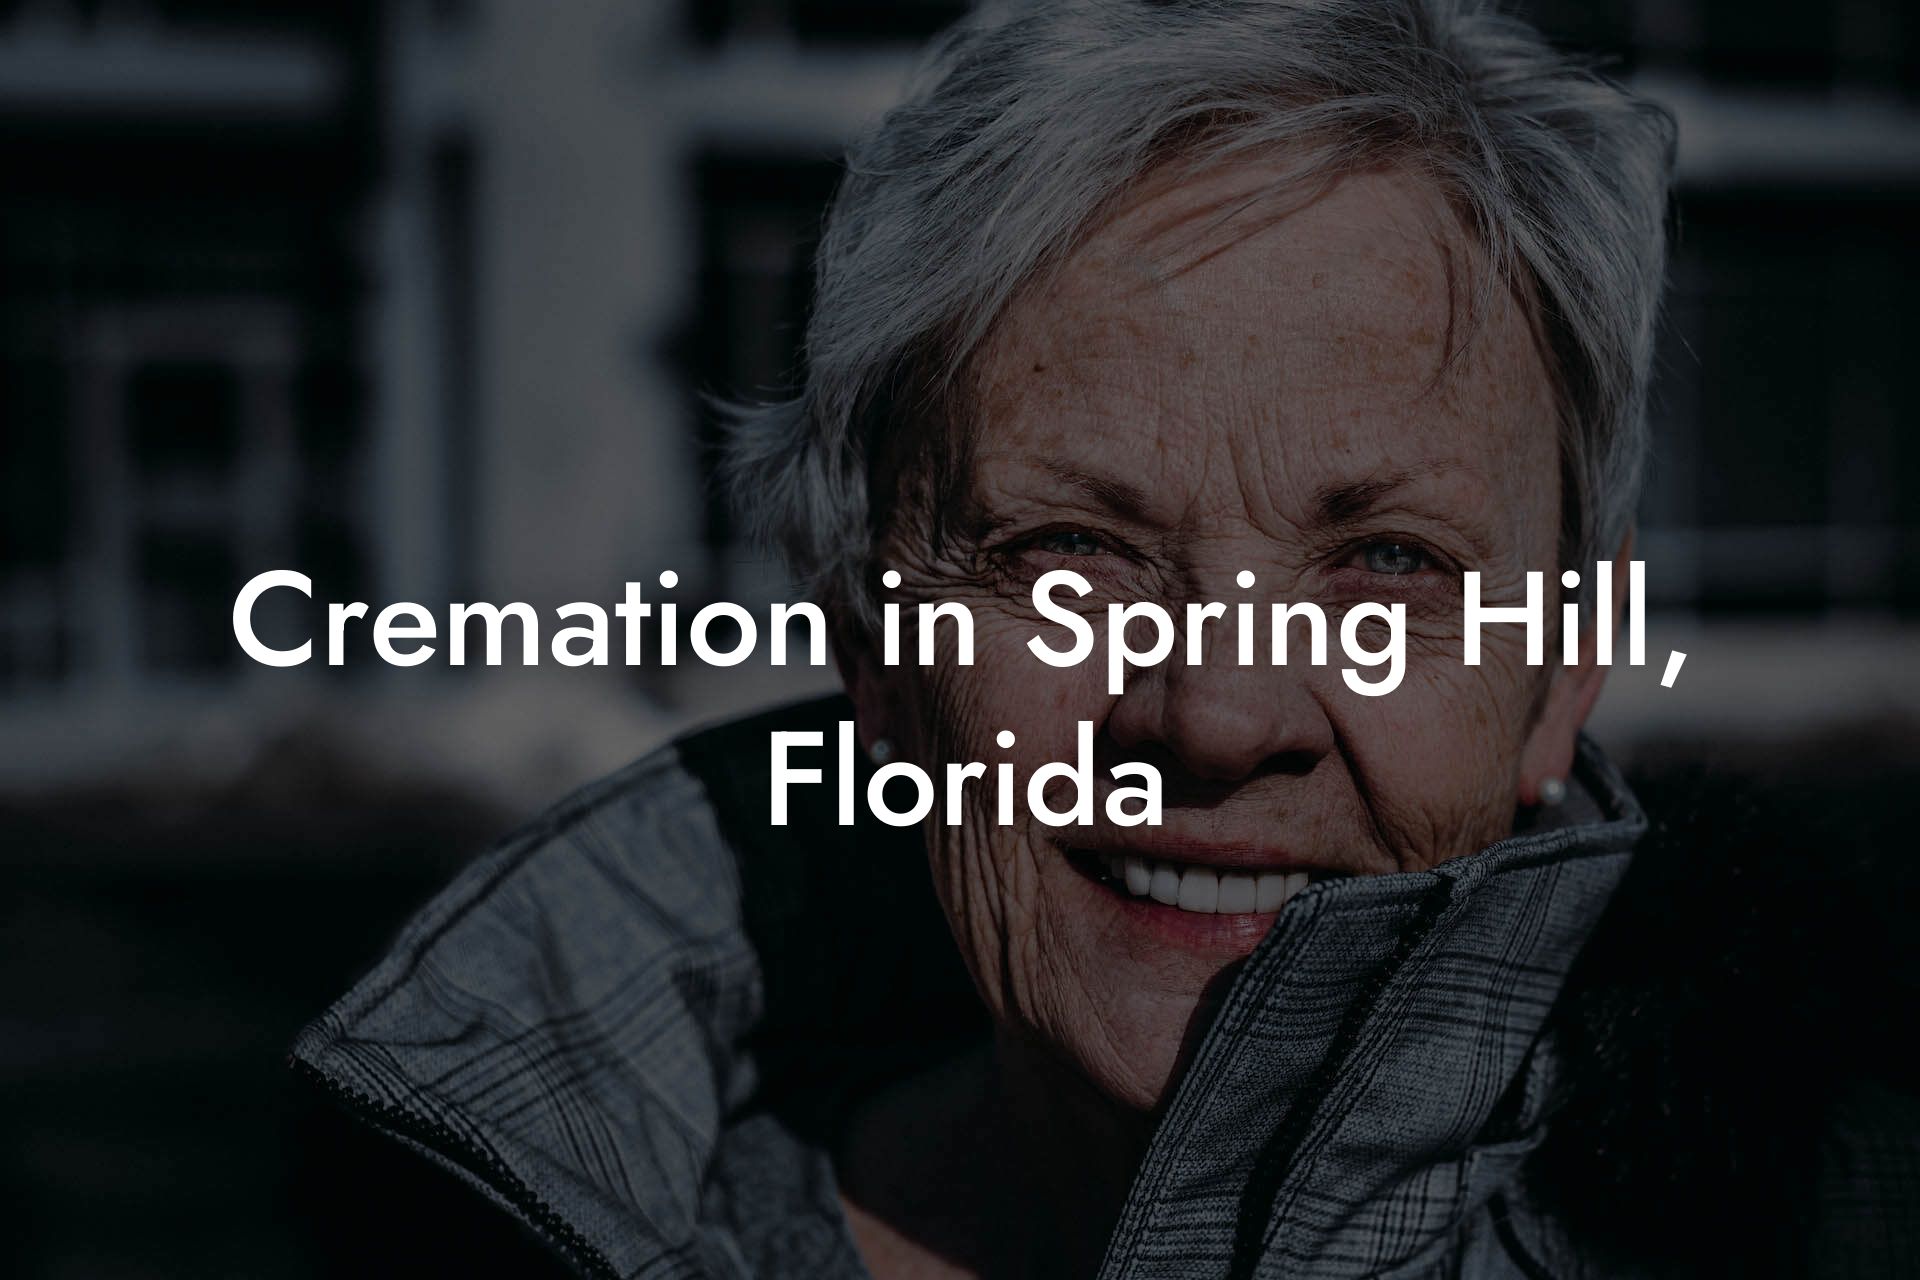 Cremation in Spring Hill, Florida